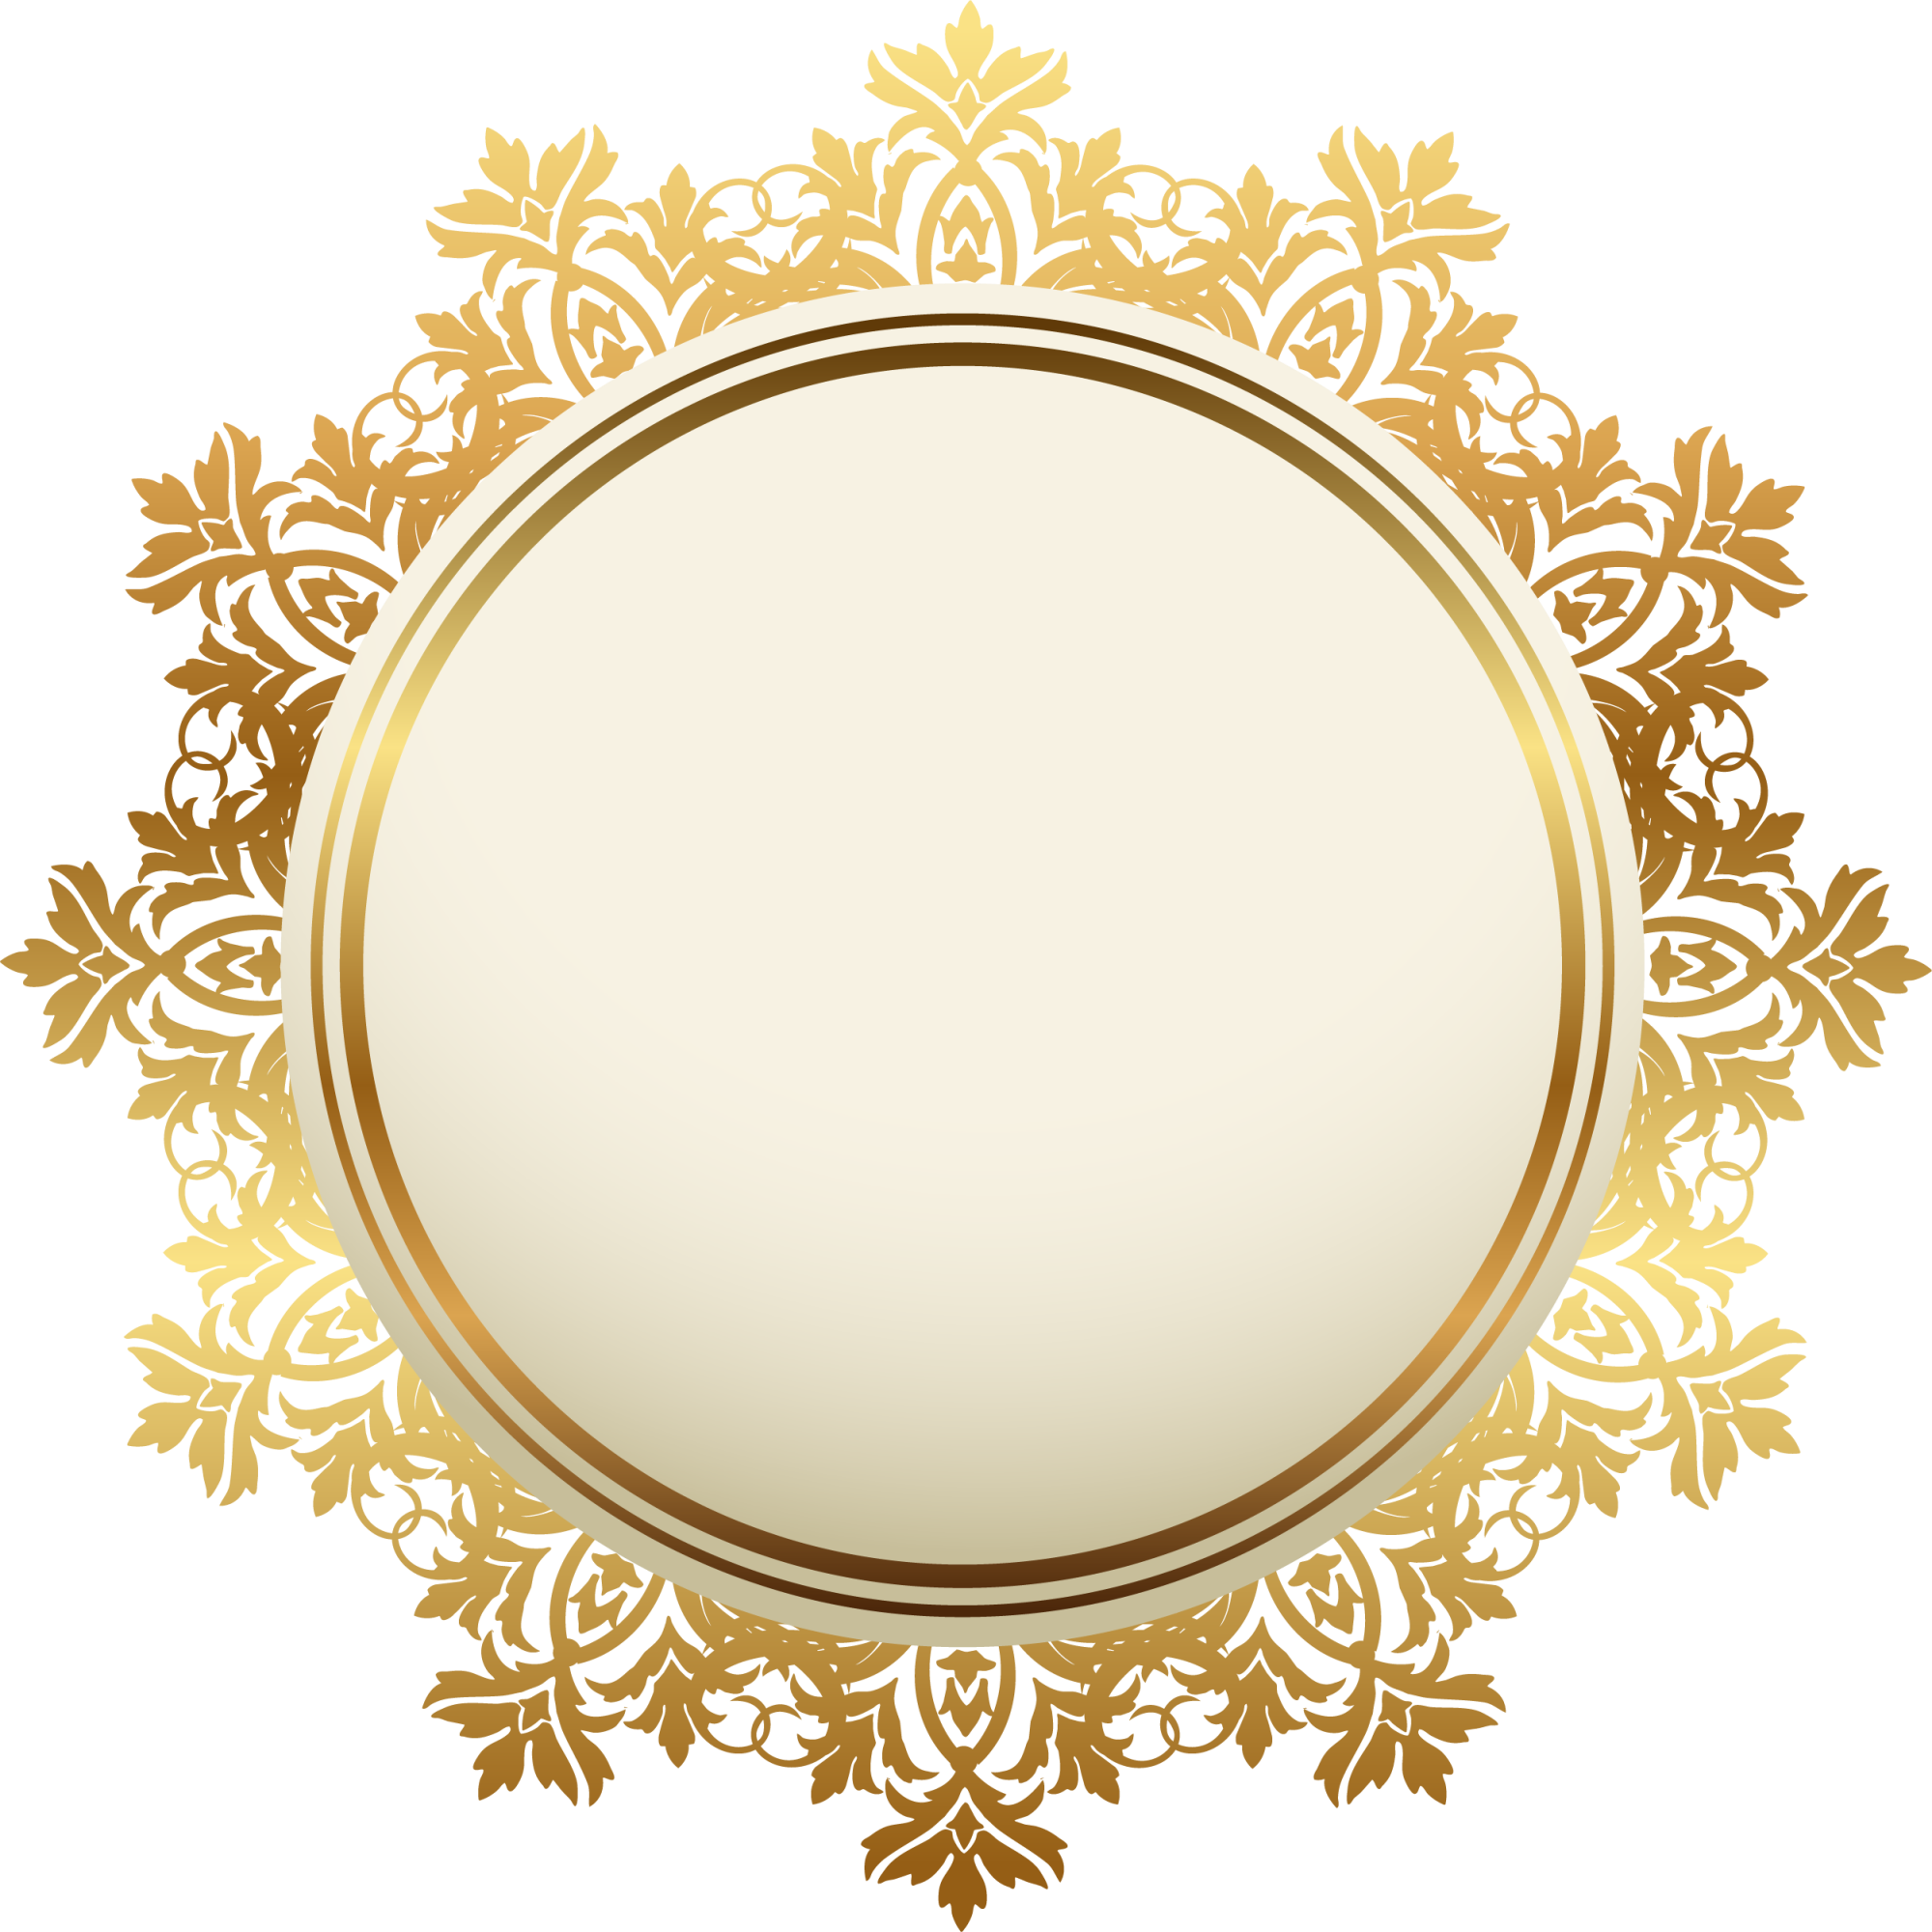 Vector Badge Free Clipart HQ PNG Image